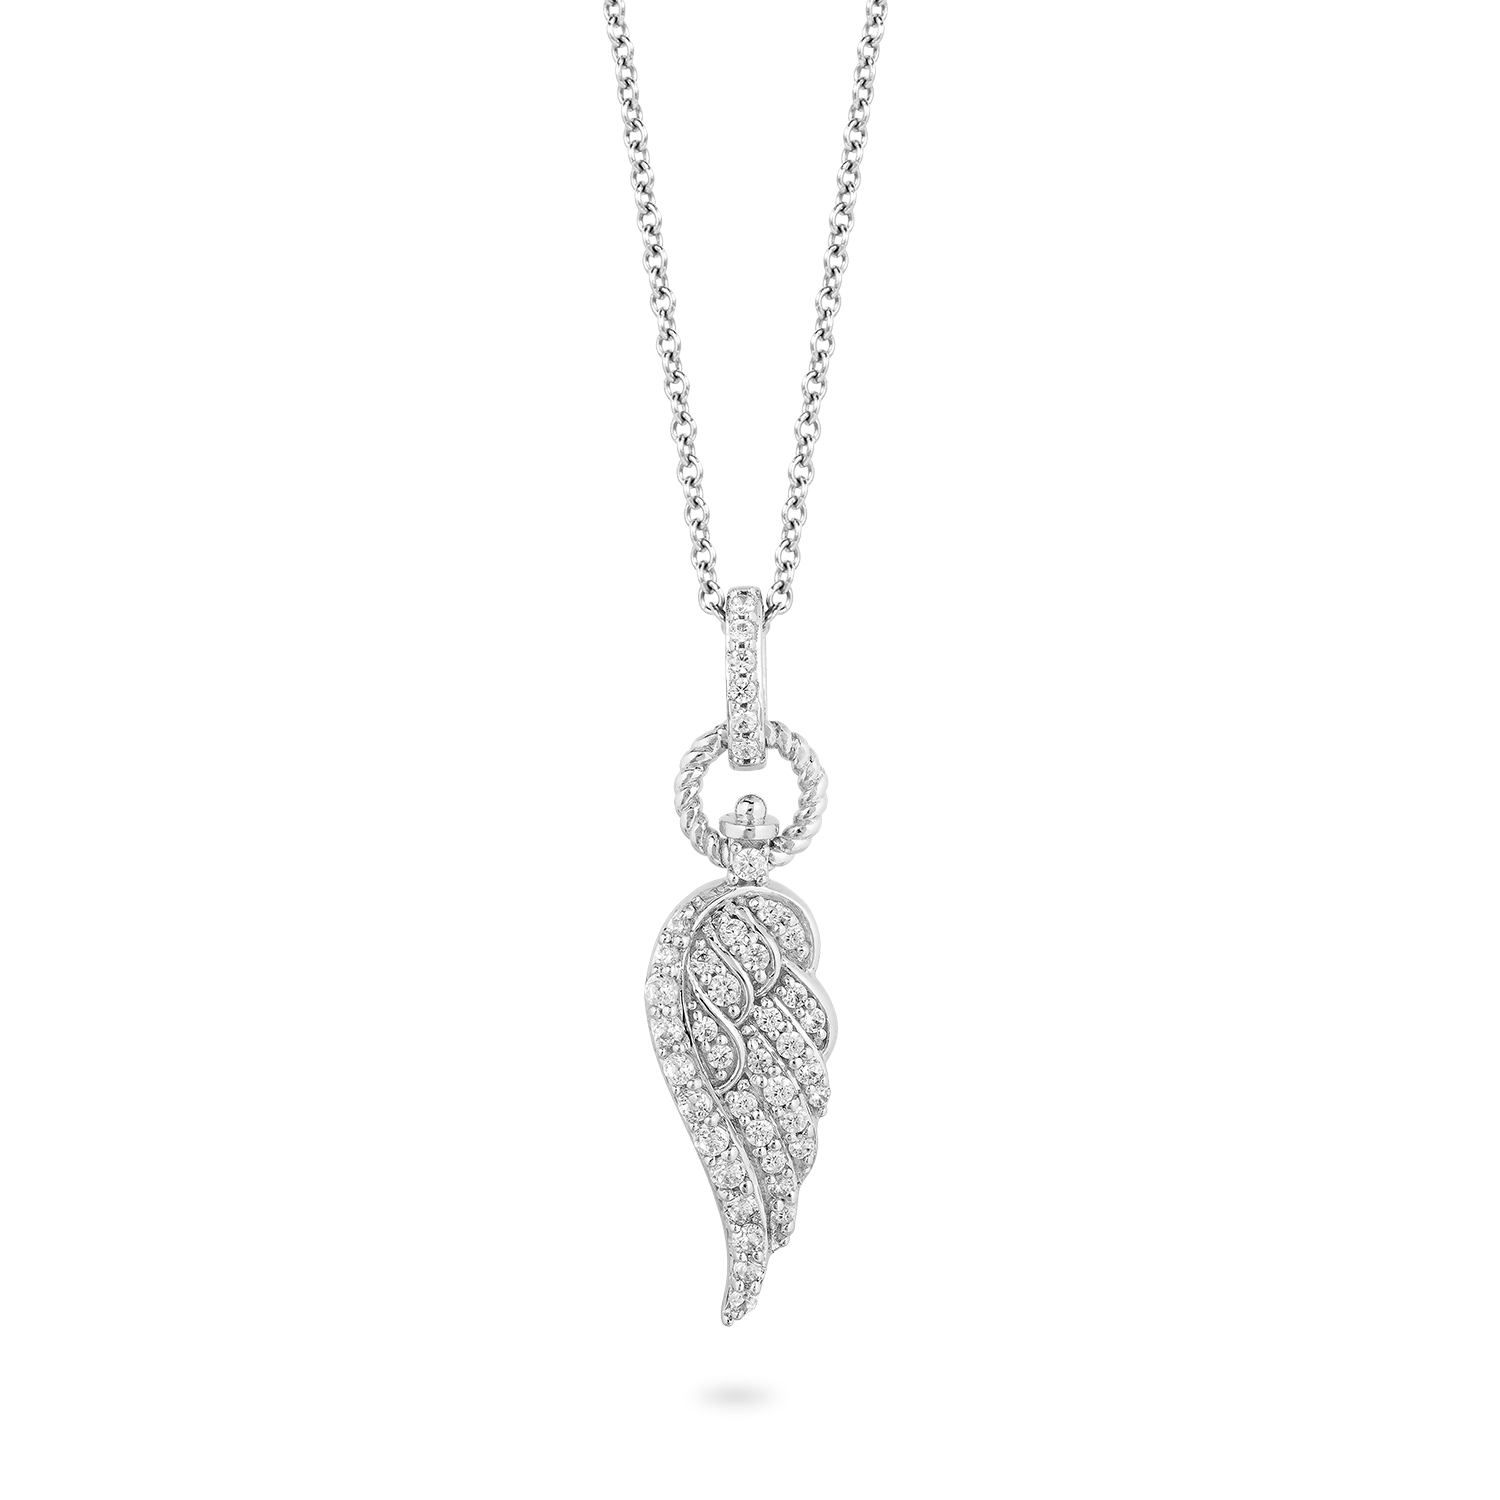 Angel Necklace, Silver Angel Necklace, Angel Wing Necklace, Silver